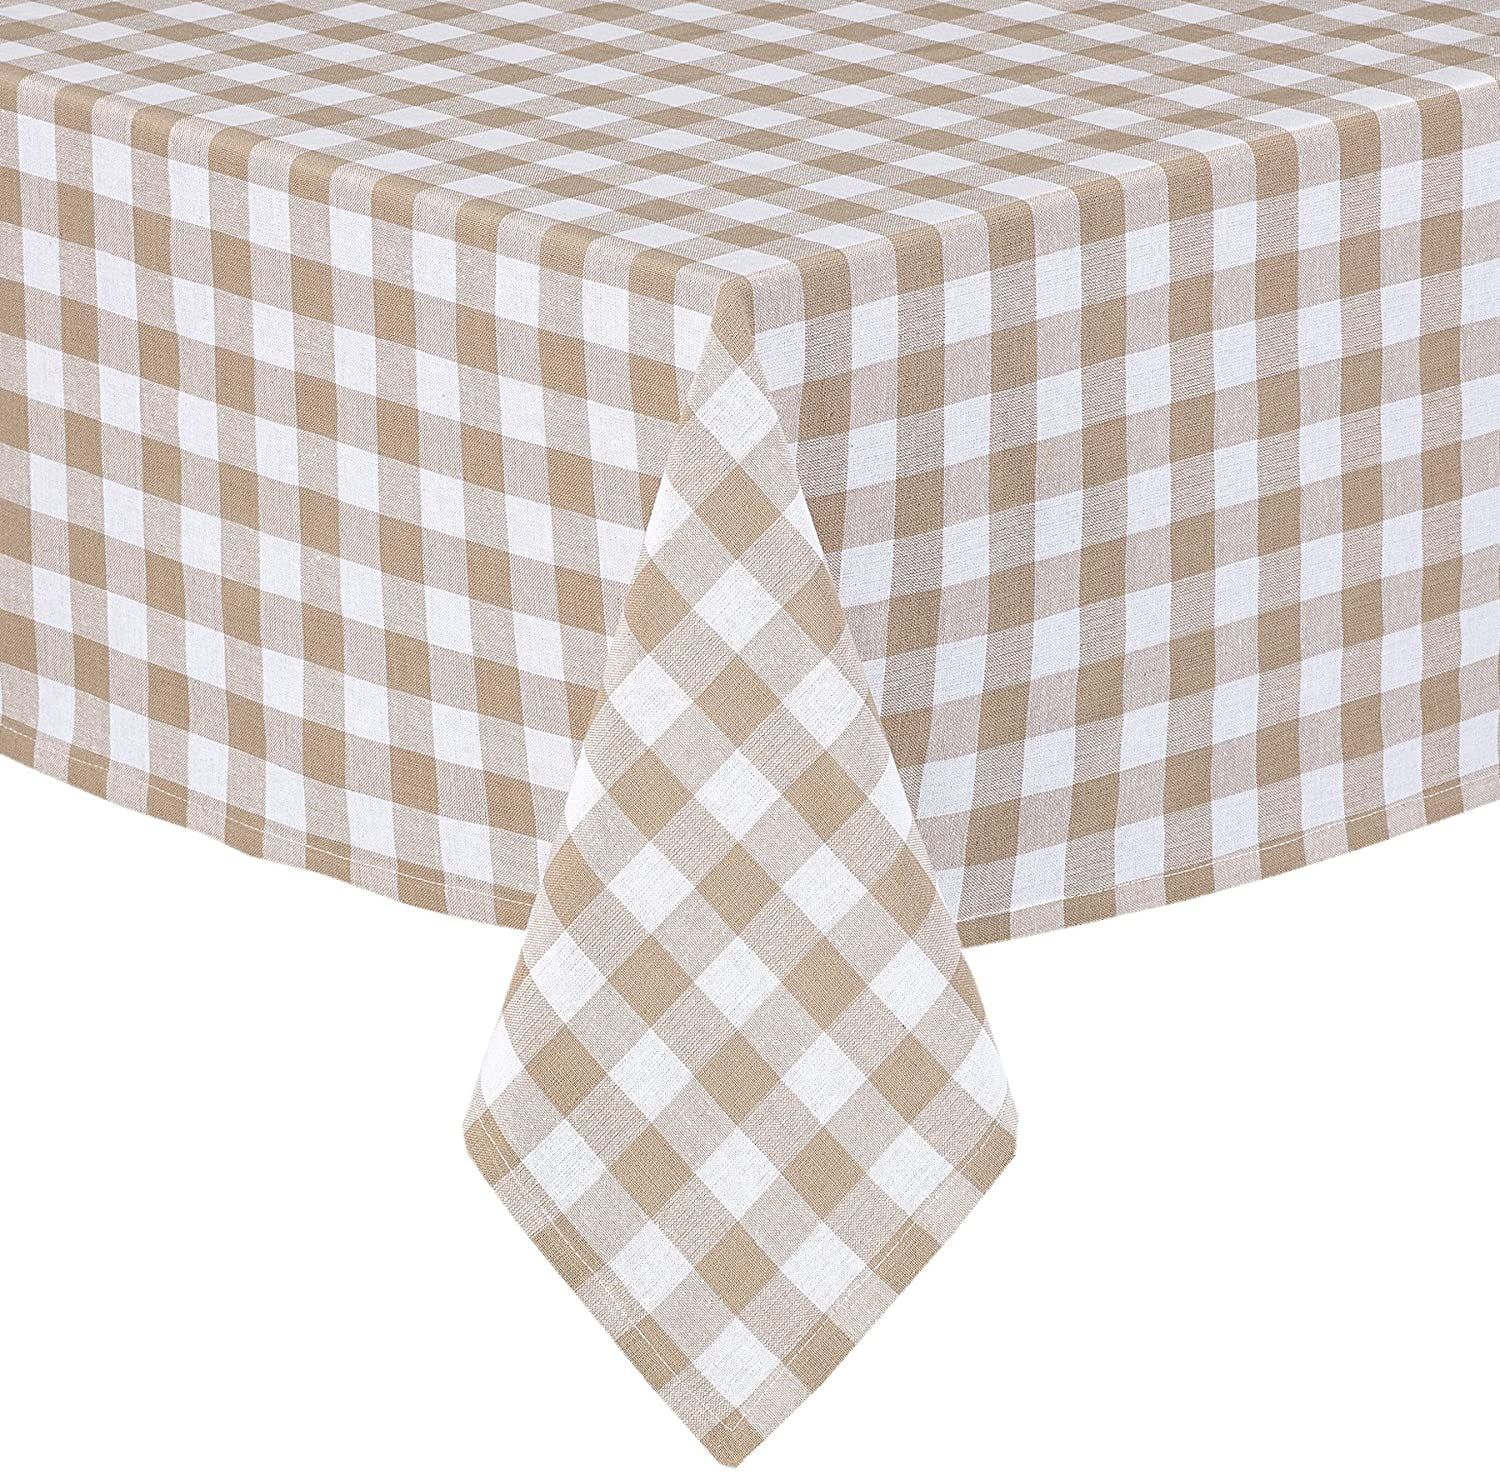 Country Rustic Buffalo Plaid Cotton Fabric Tablecloth by Home Bargains Plus, Checkered Cottage Gi... | Walmart (US)